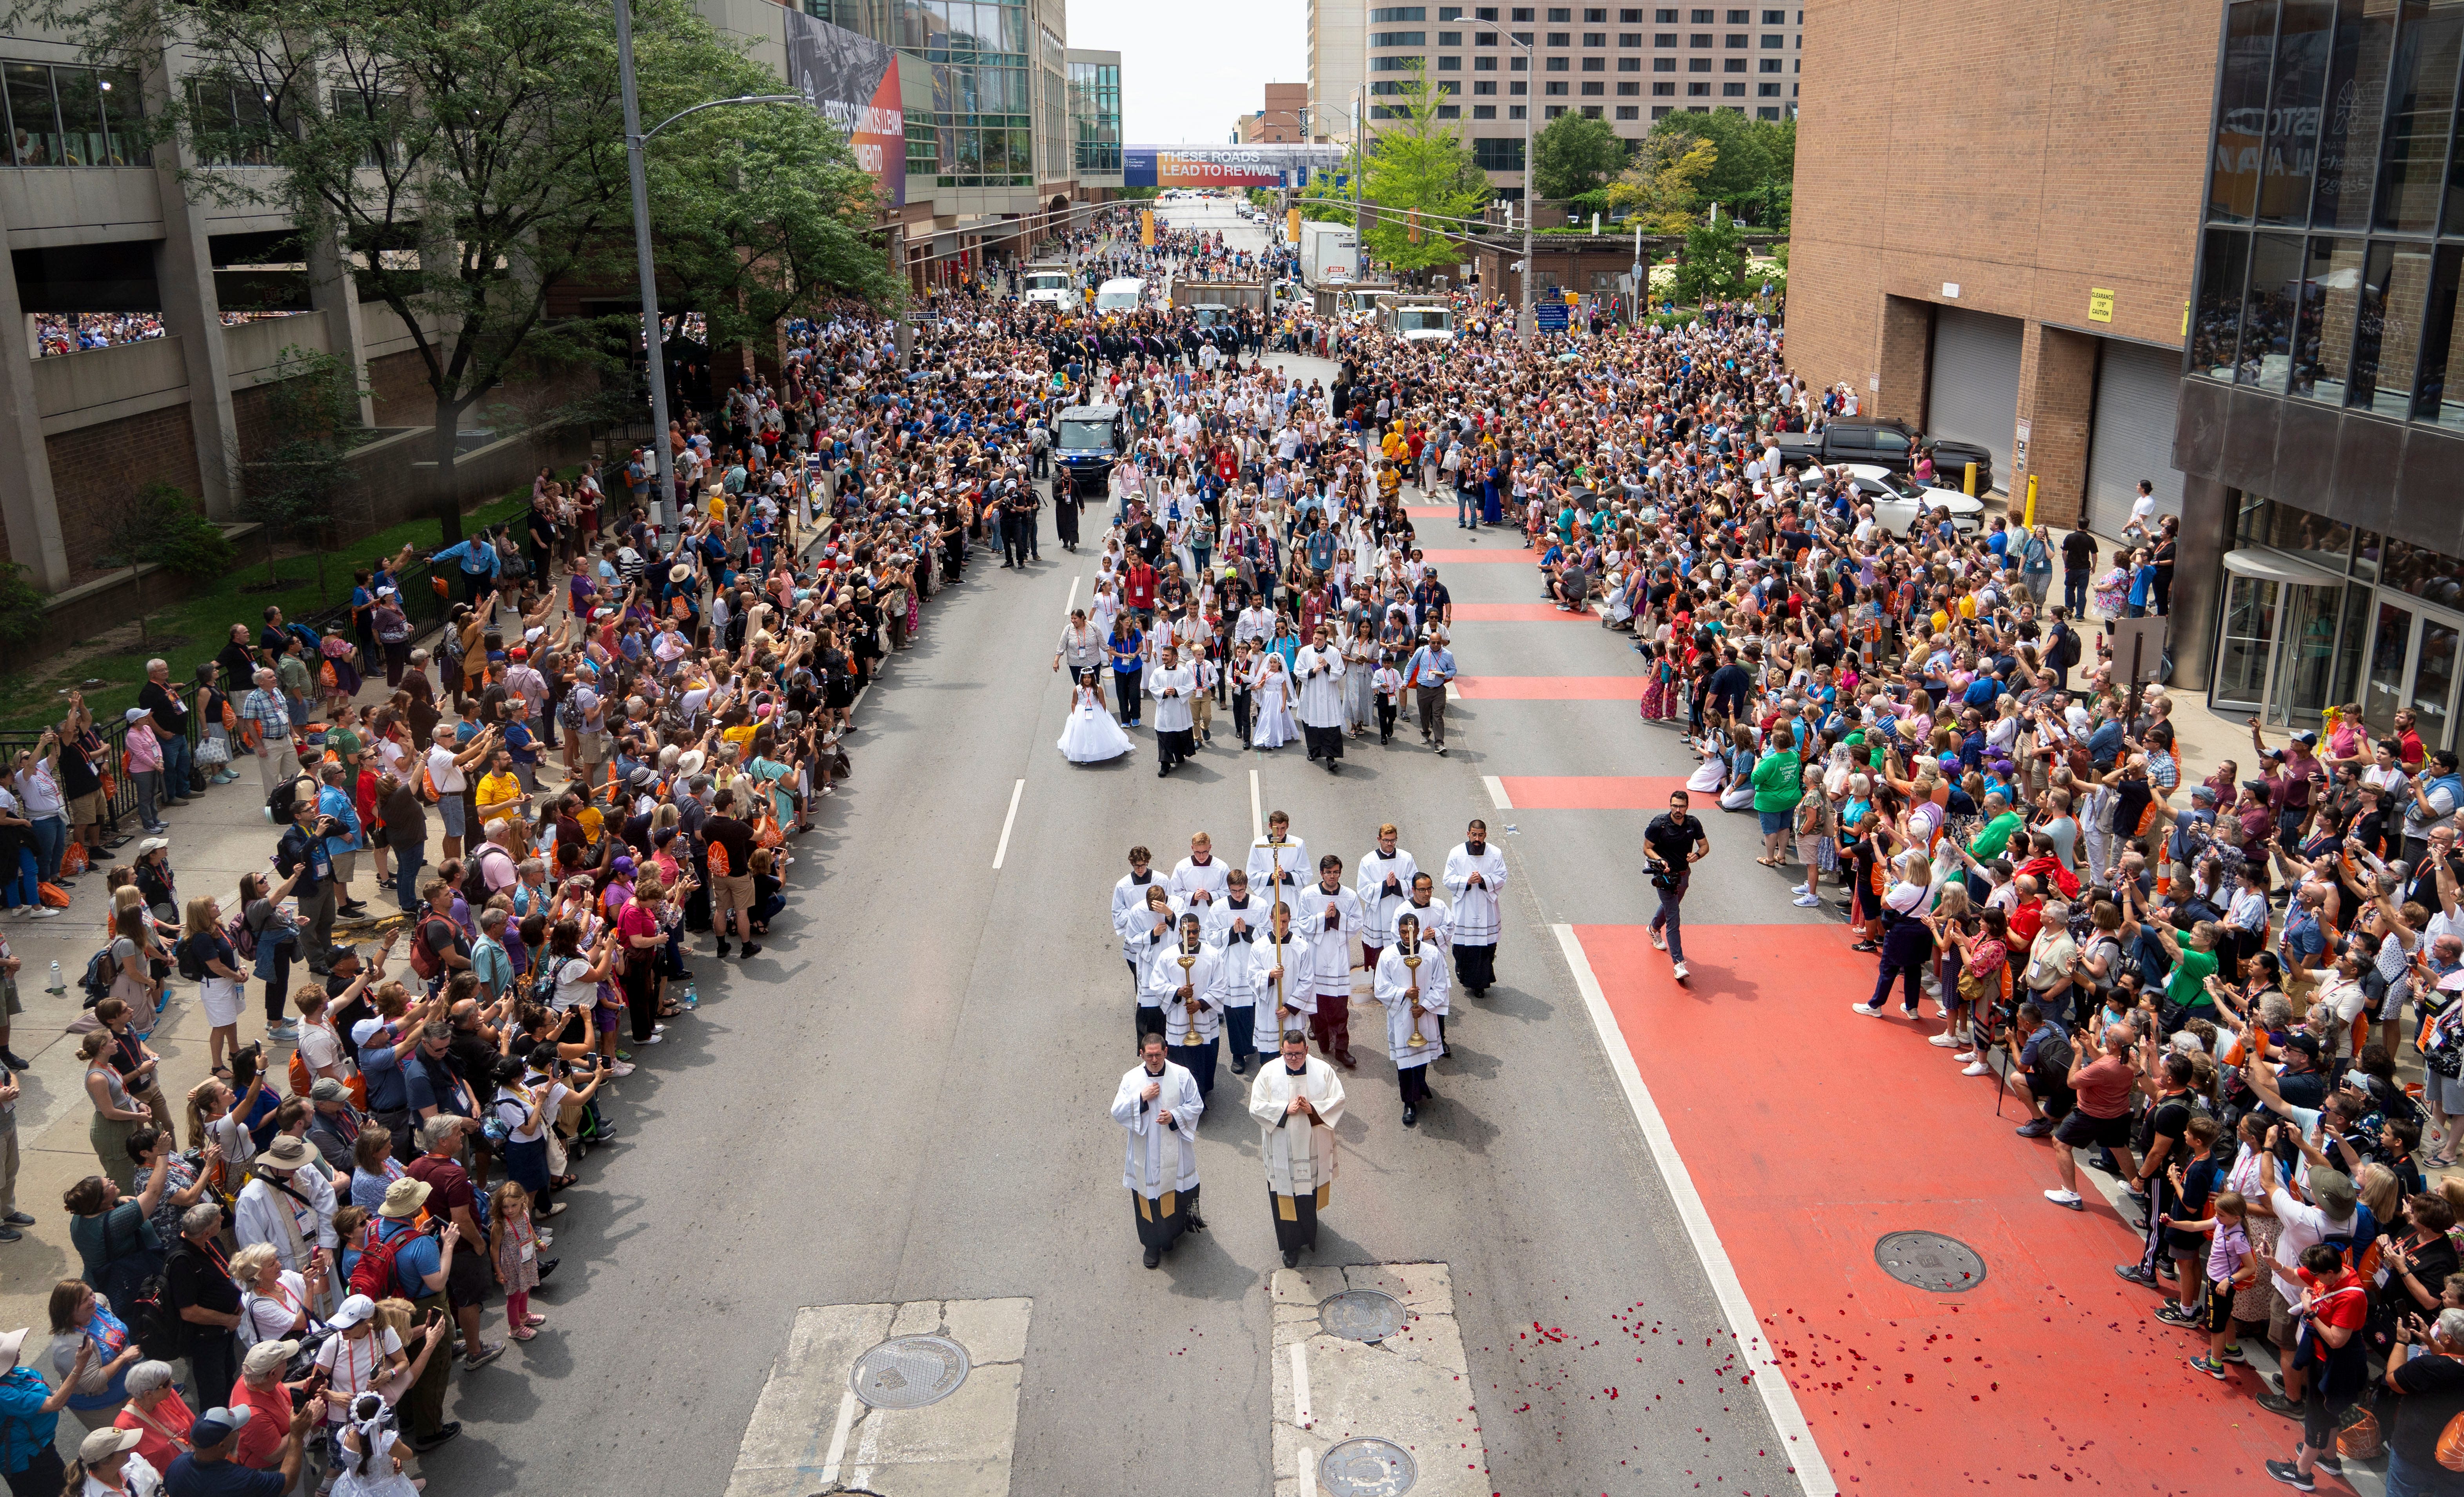 Watch as Indy streets fill with Eucharistic Procession participants from the National Eucharistic Congress